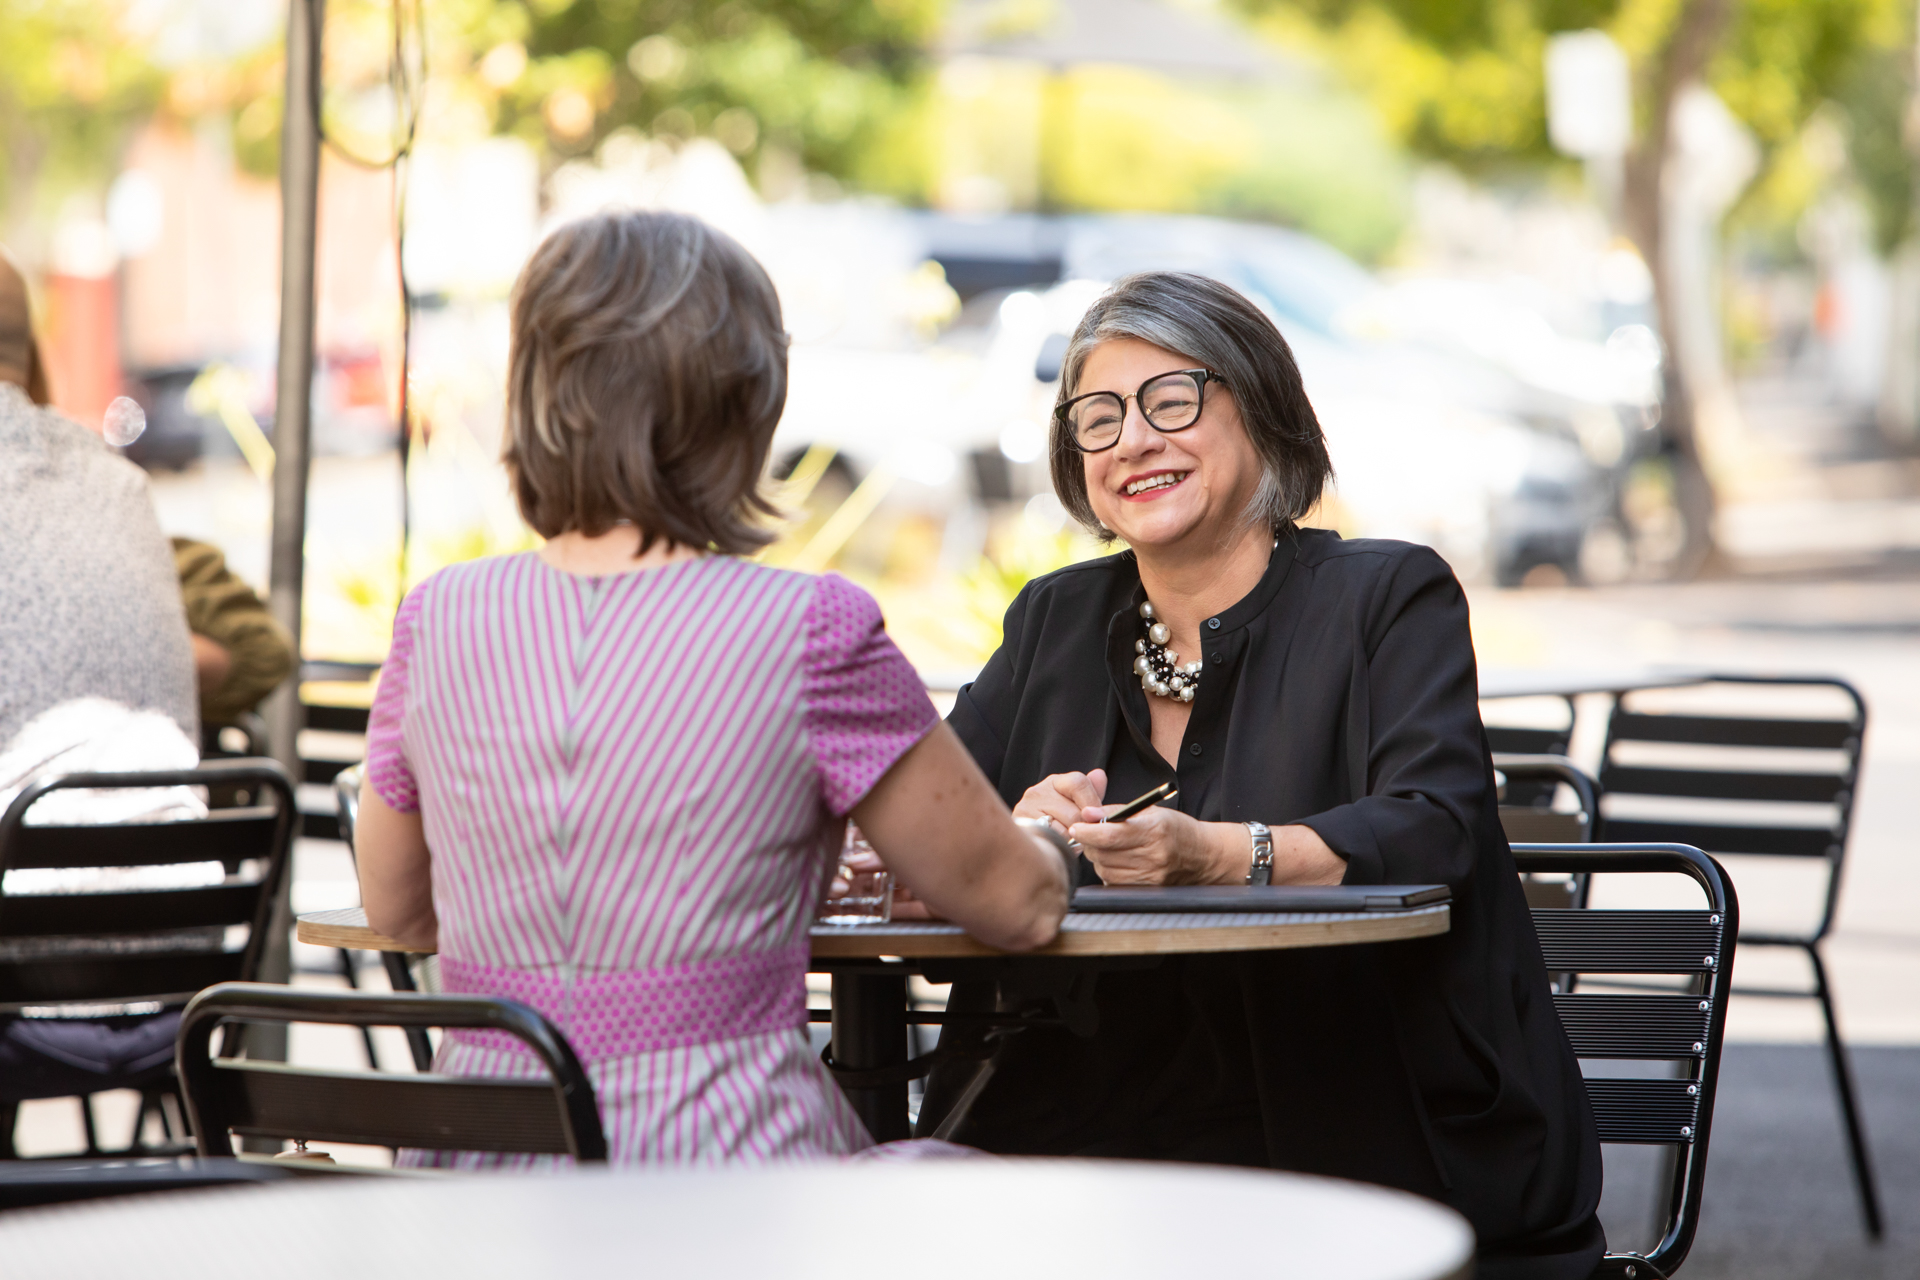 Female business owner chatting with a client at an outdoor cafe table